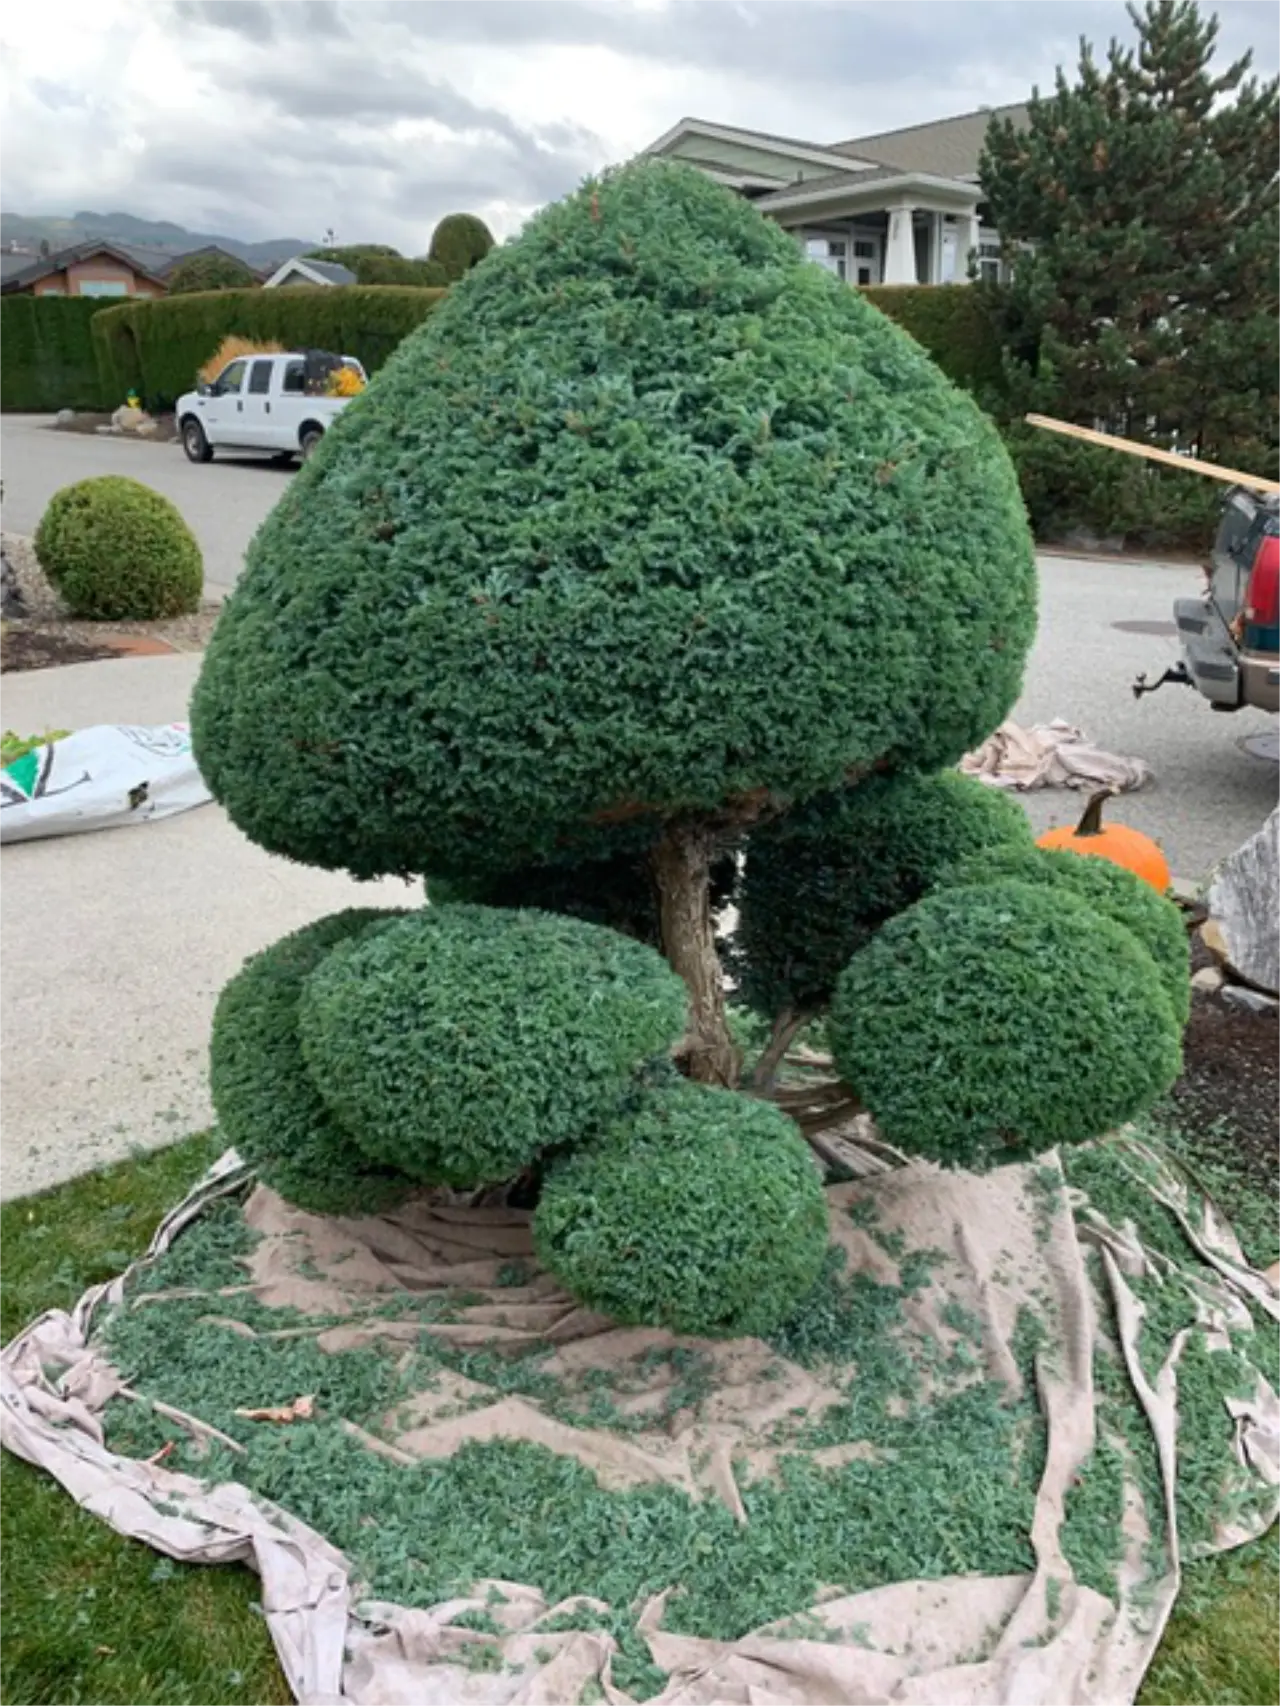 A meticulously trimmed tree with spheres and mushroom-shaped topiary, with clippings on a tarp at the base, in a residential setting.